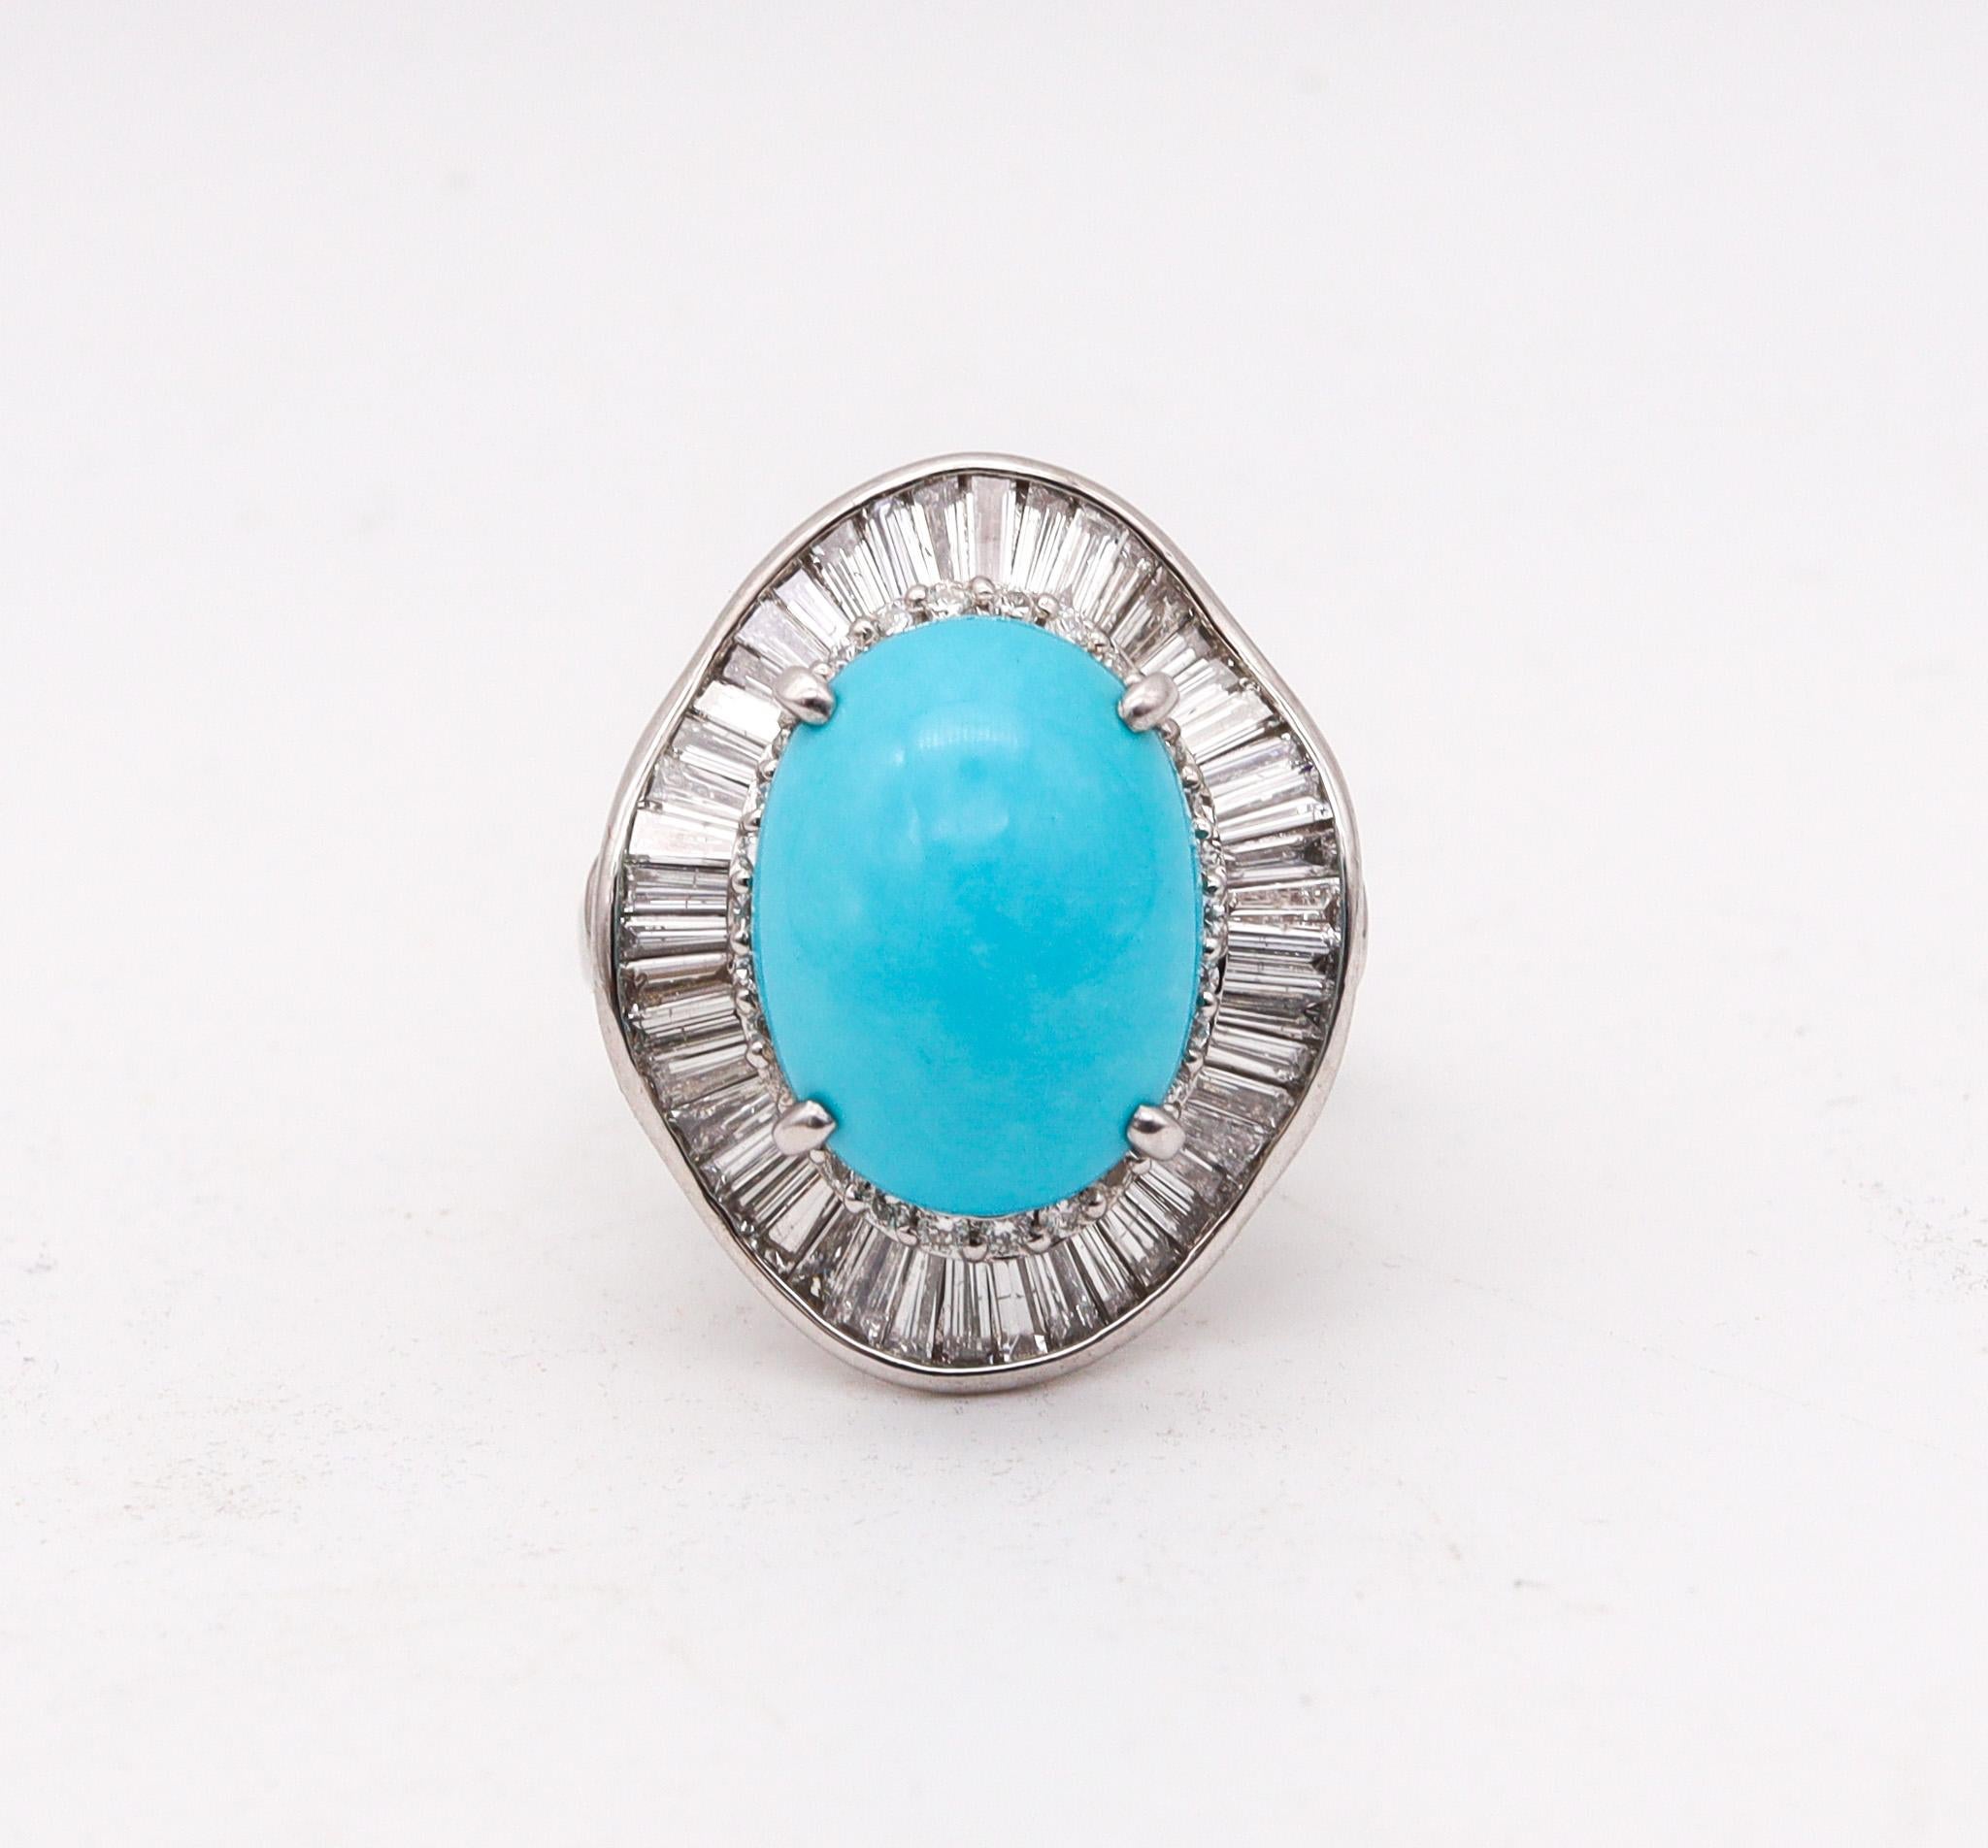 Classic ballerina turquoise cocktail ring.

Beautiful and elegant ring, created during the modernist period, back in the 1970. This gem set classic ballerina ring was carefully crafted with a wavy pattern in solid .900/.999 platinum and is